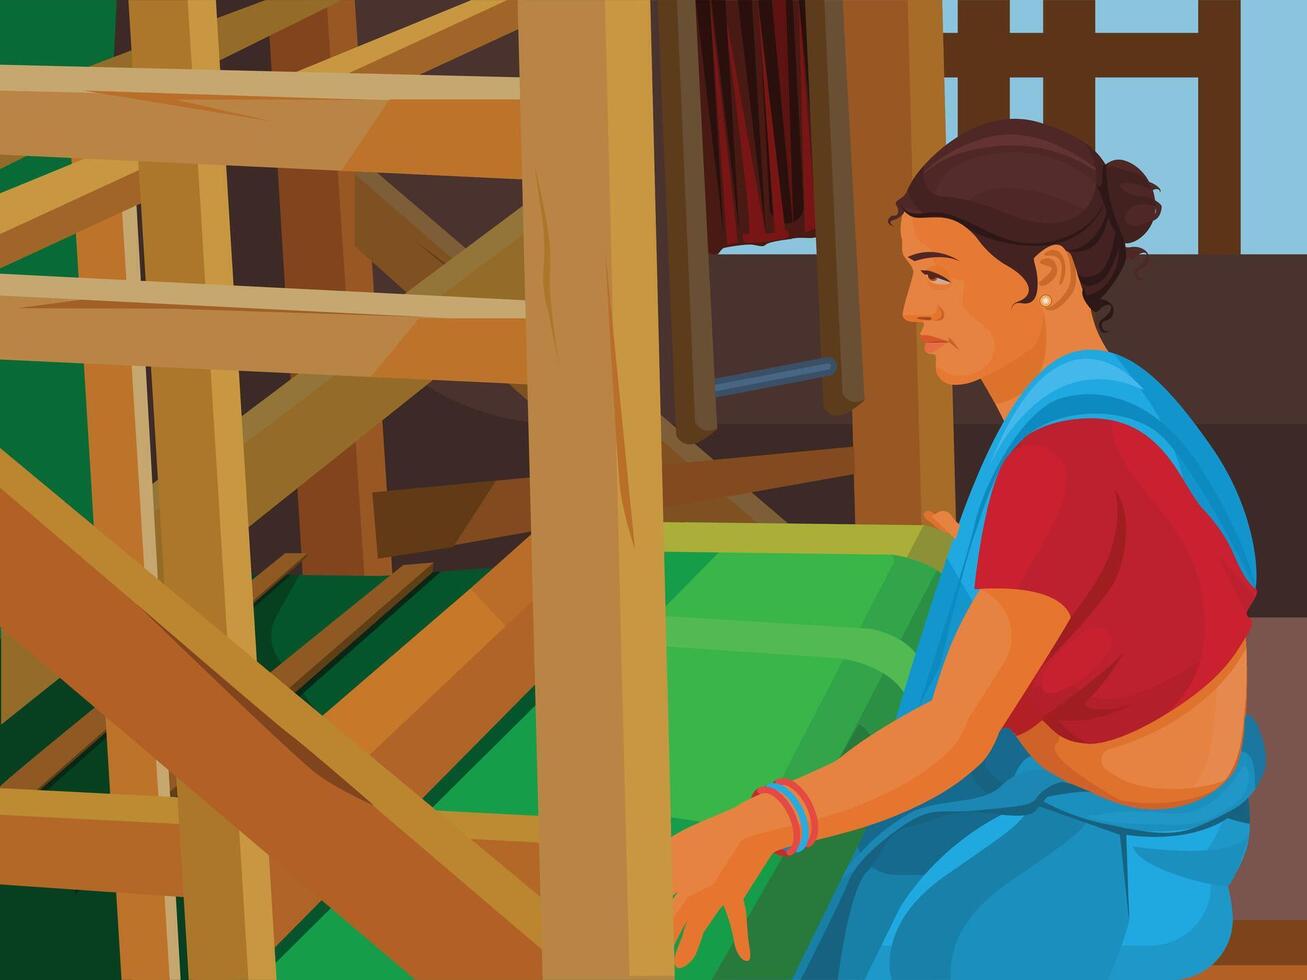 Indian woman, Traditional handloom weaver, village local weavers making cloth for scarves vector